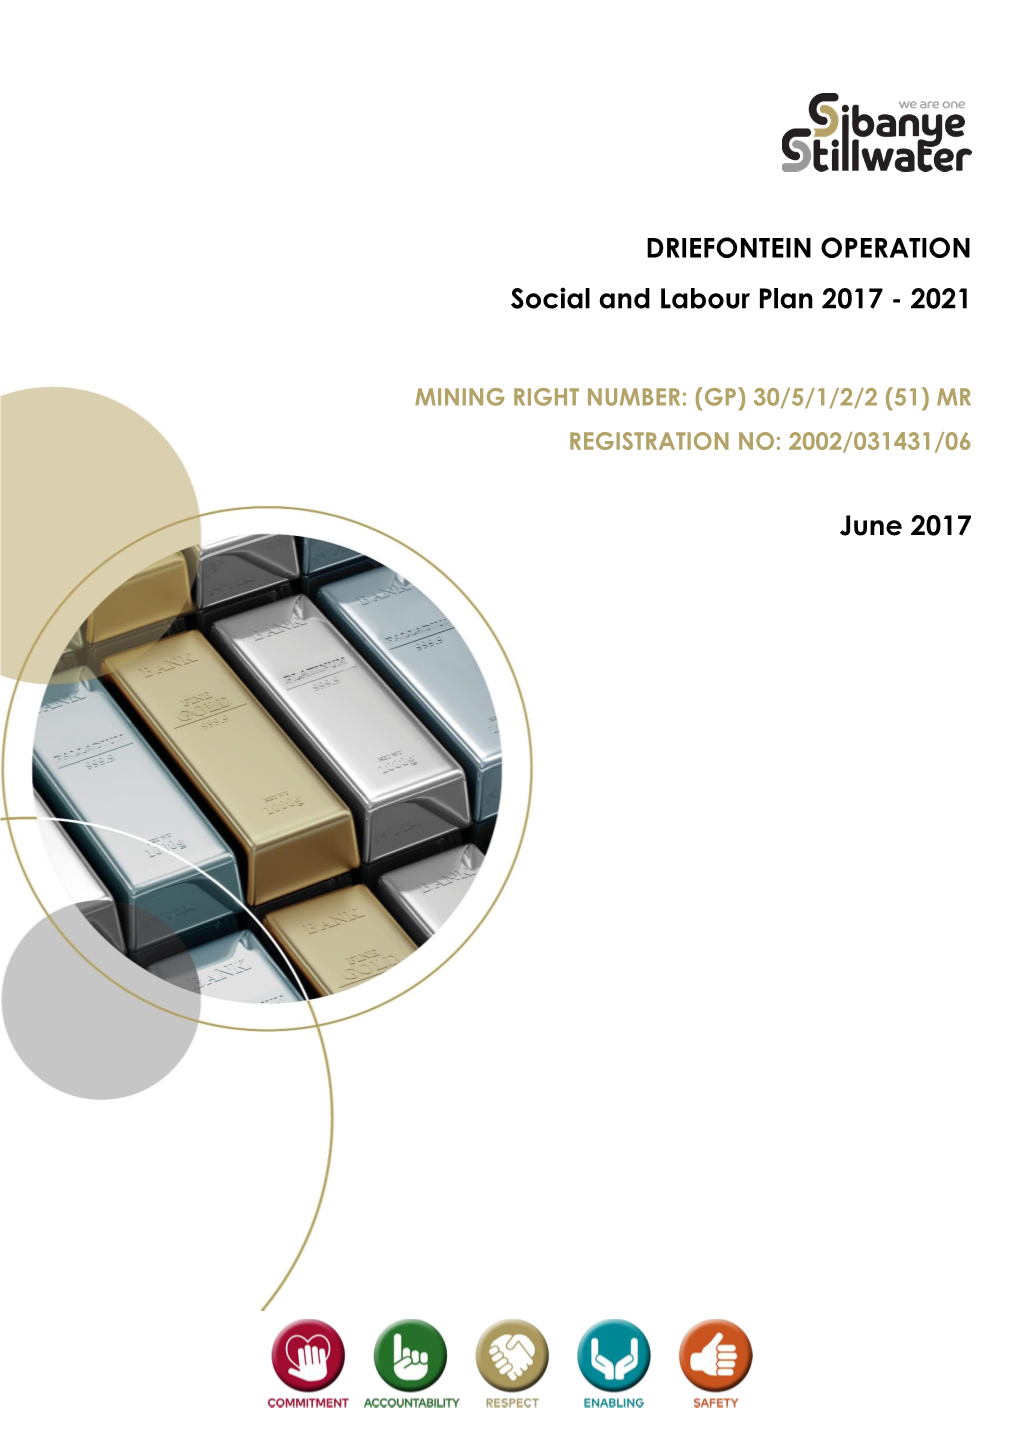 DRIEFONTEIN OPERATION Social and Labour Plan 2017 - 2021